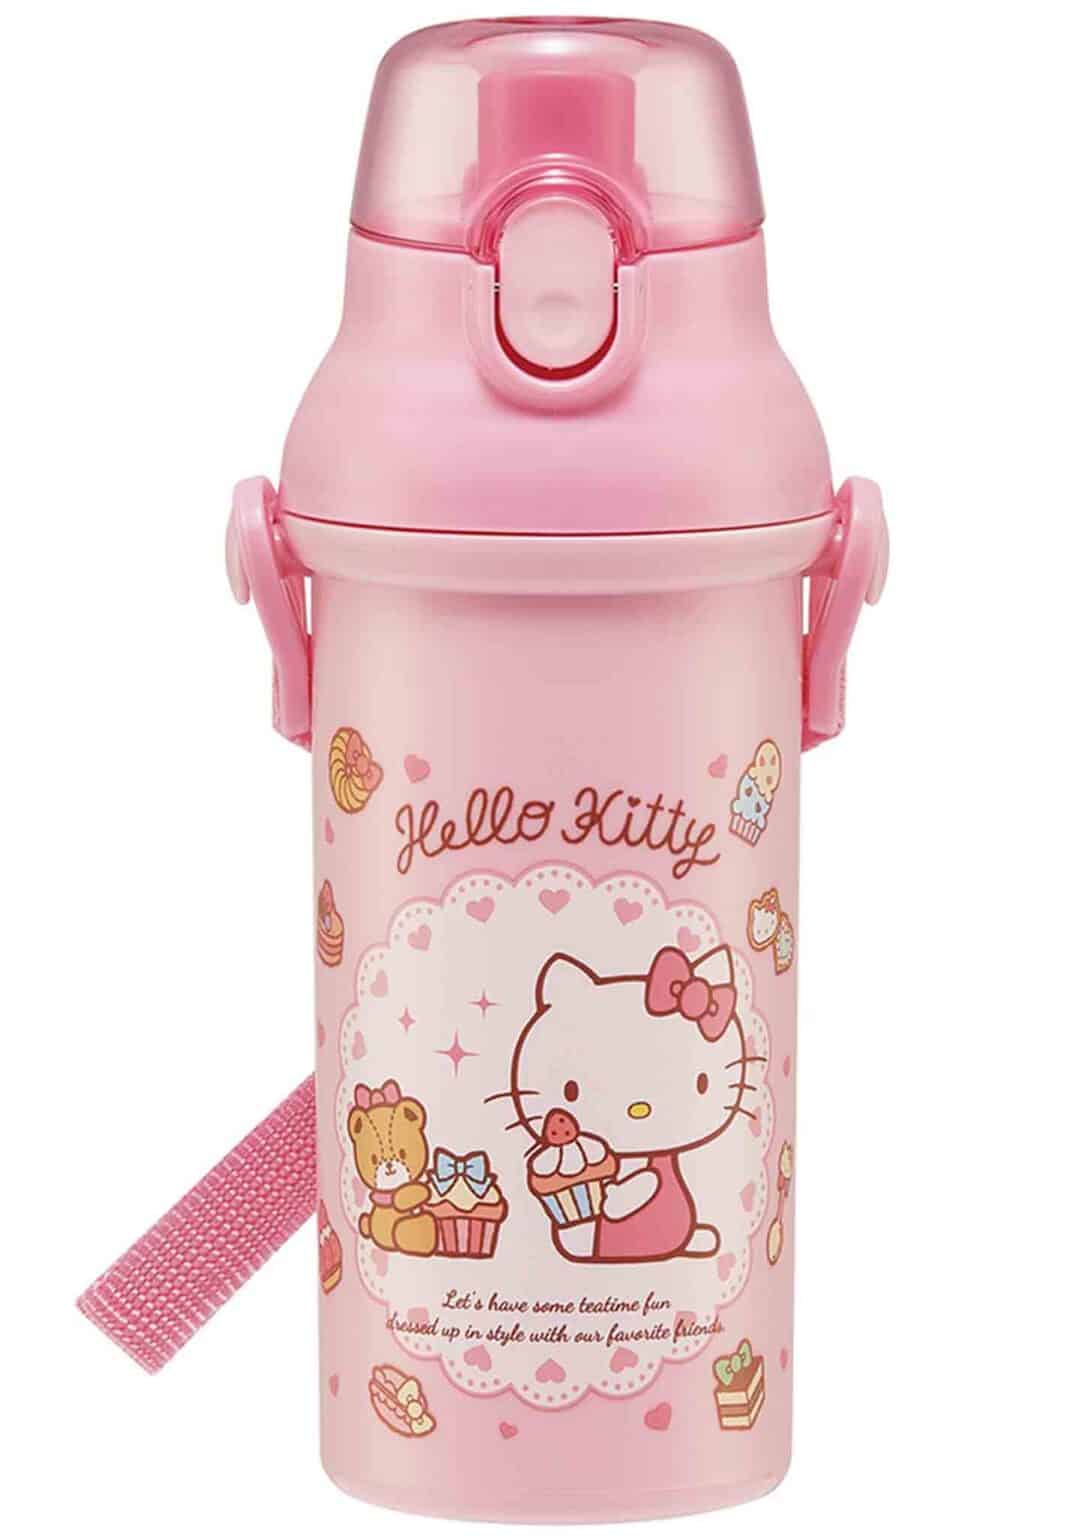 Clever Idiots Sanrio Friends Easy Pop-Up Water Bottle : Cinnamoroll, Hello Kitty, My Melody Hello Kitty Kawaii Gifts 4973307608230